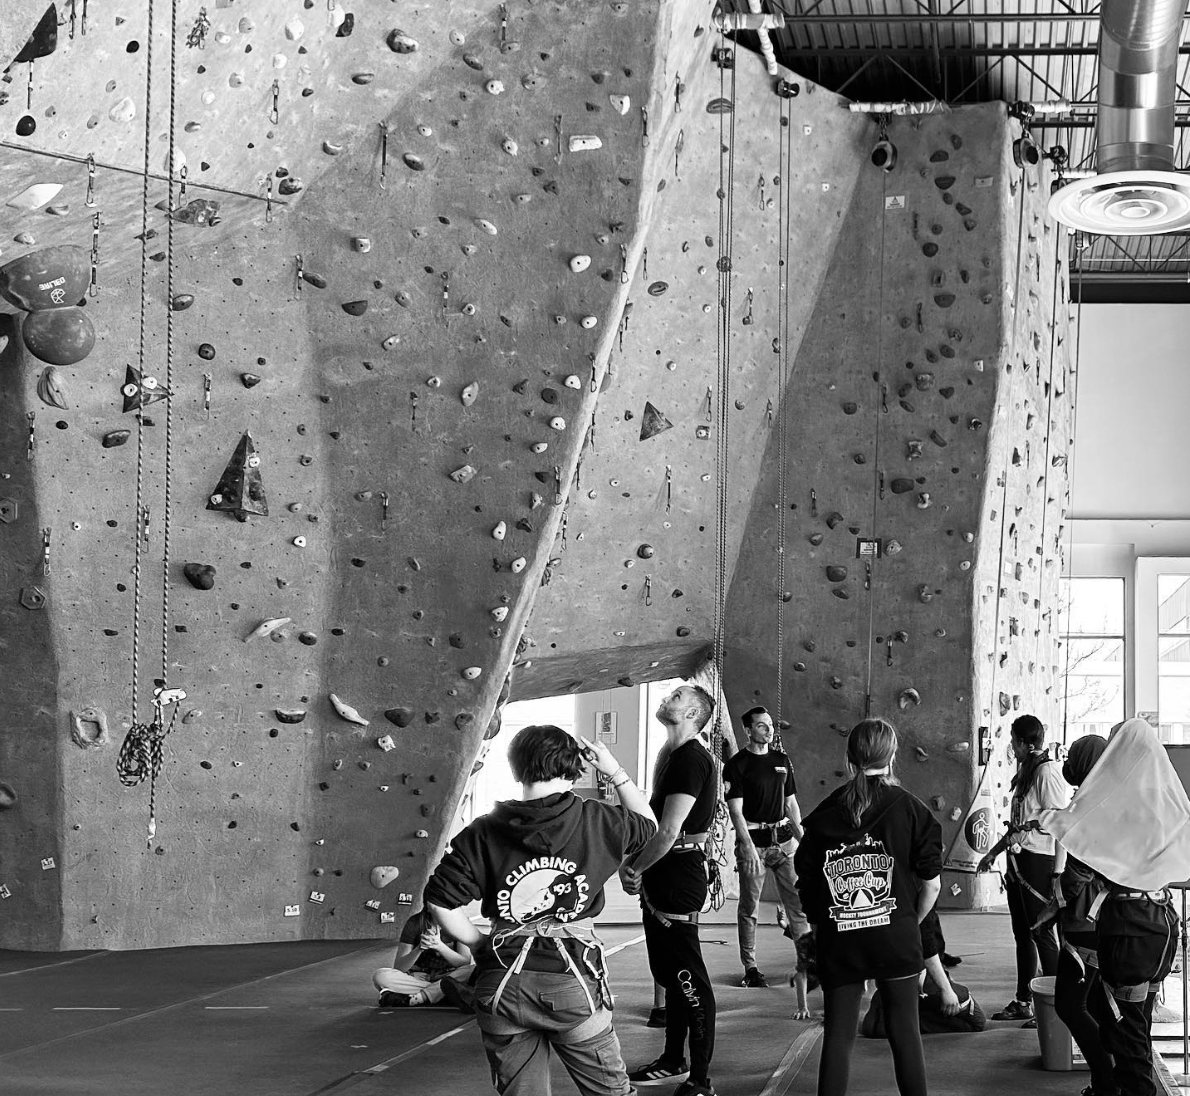 'Project Cliff Hanger. An amazing day of climbing with wonderful neighbourhood youth. In partnership with NCO Flemingdon Park. Thanks, @copsandkidsca, for your support and generosity.' - @D55danforthNCO. Image source: d55danforthnco IG. #ProActionKids #youthempowerment